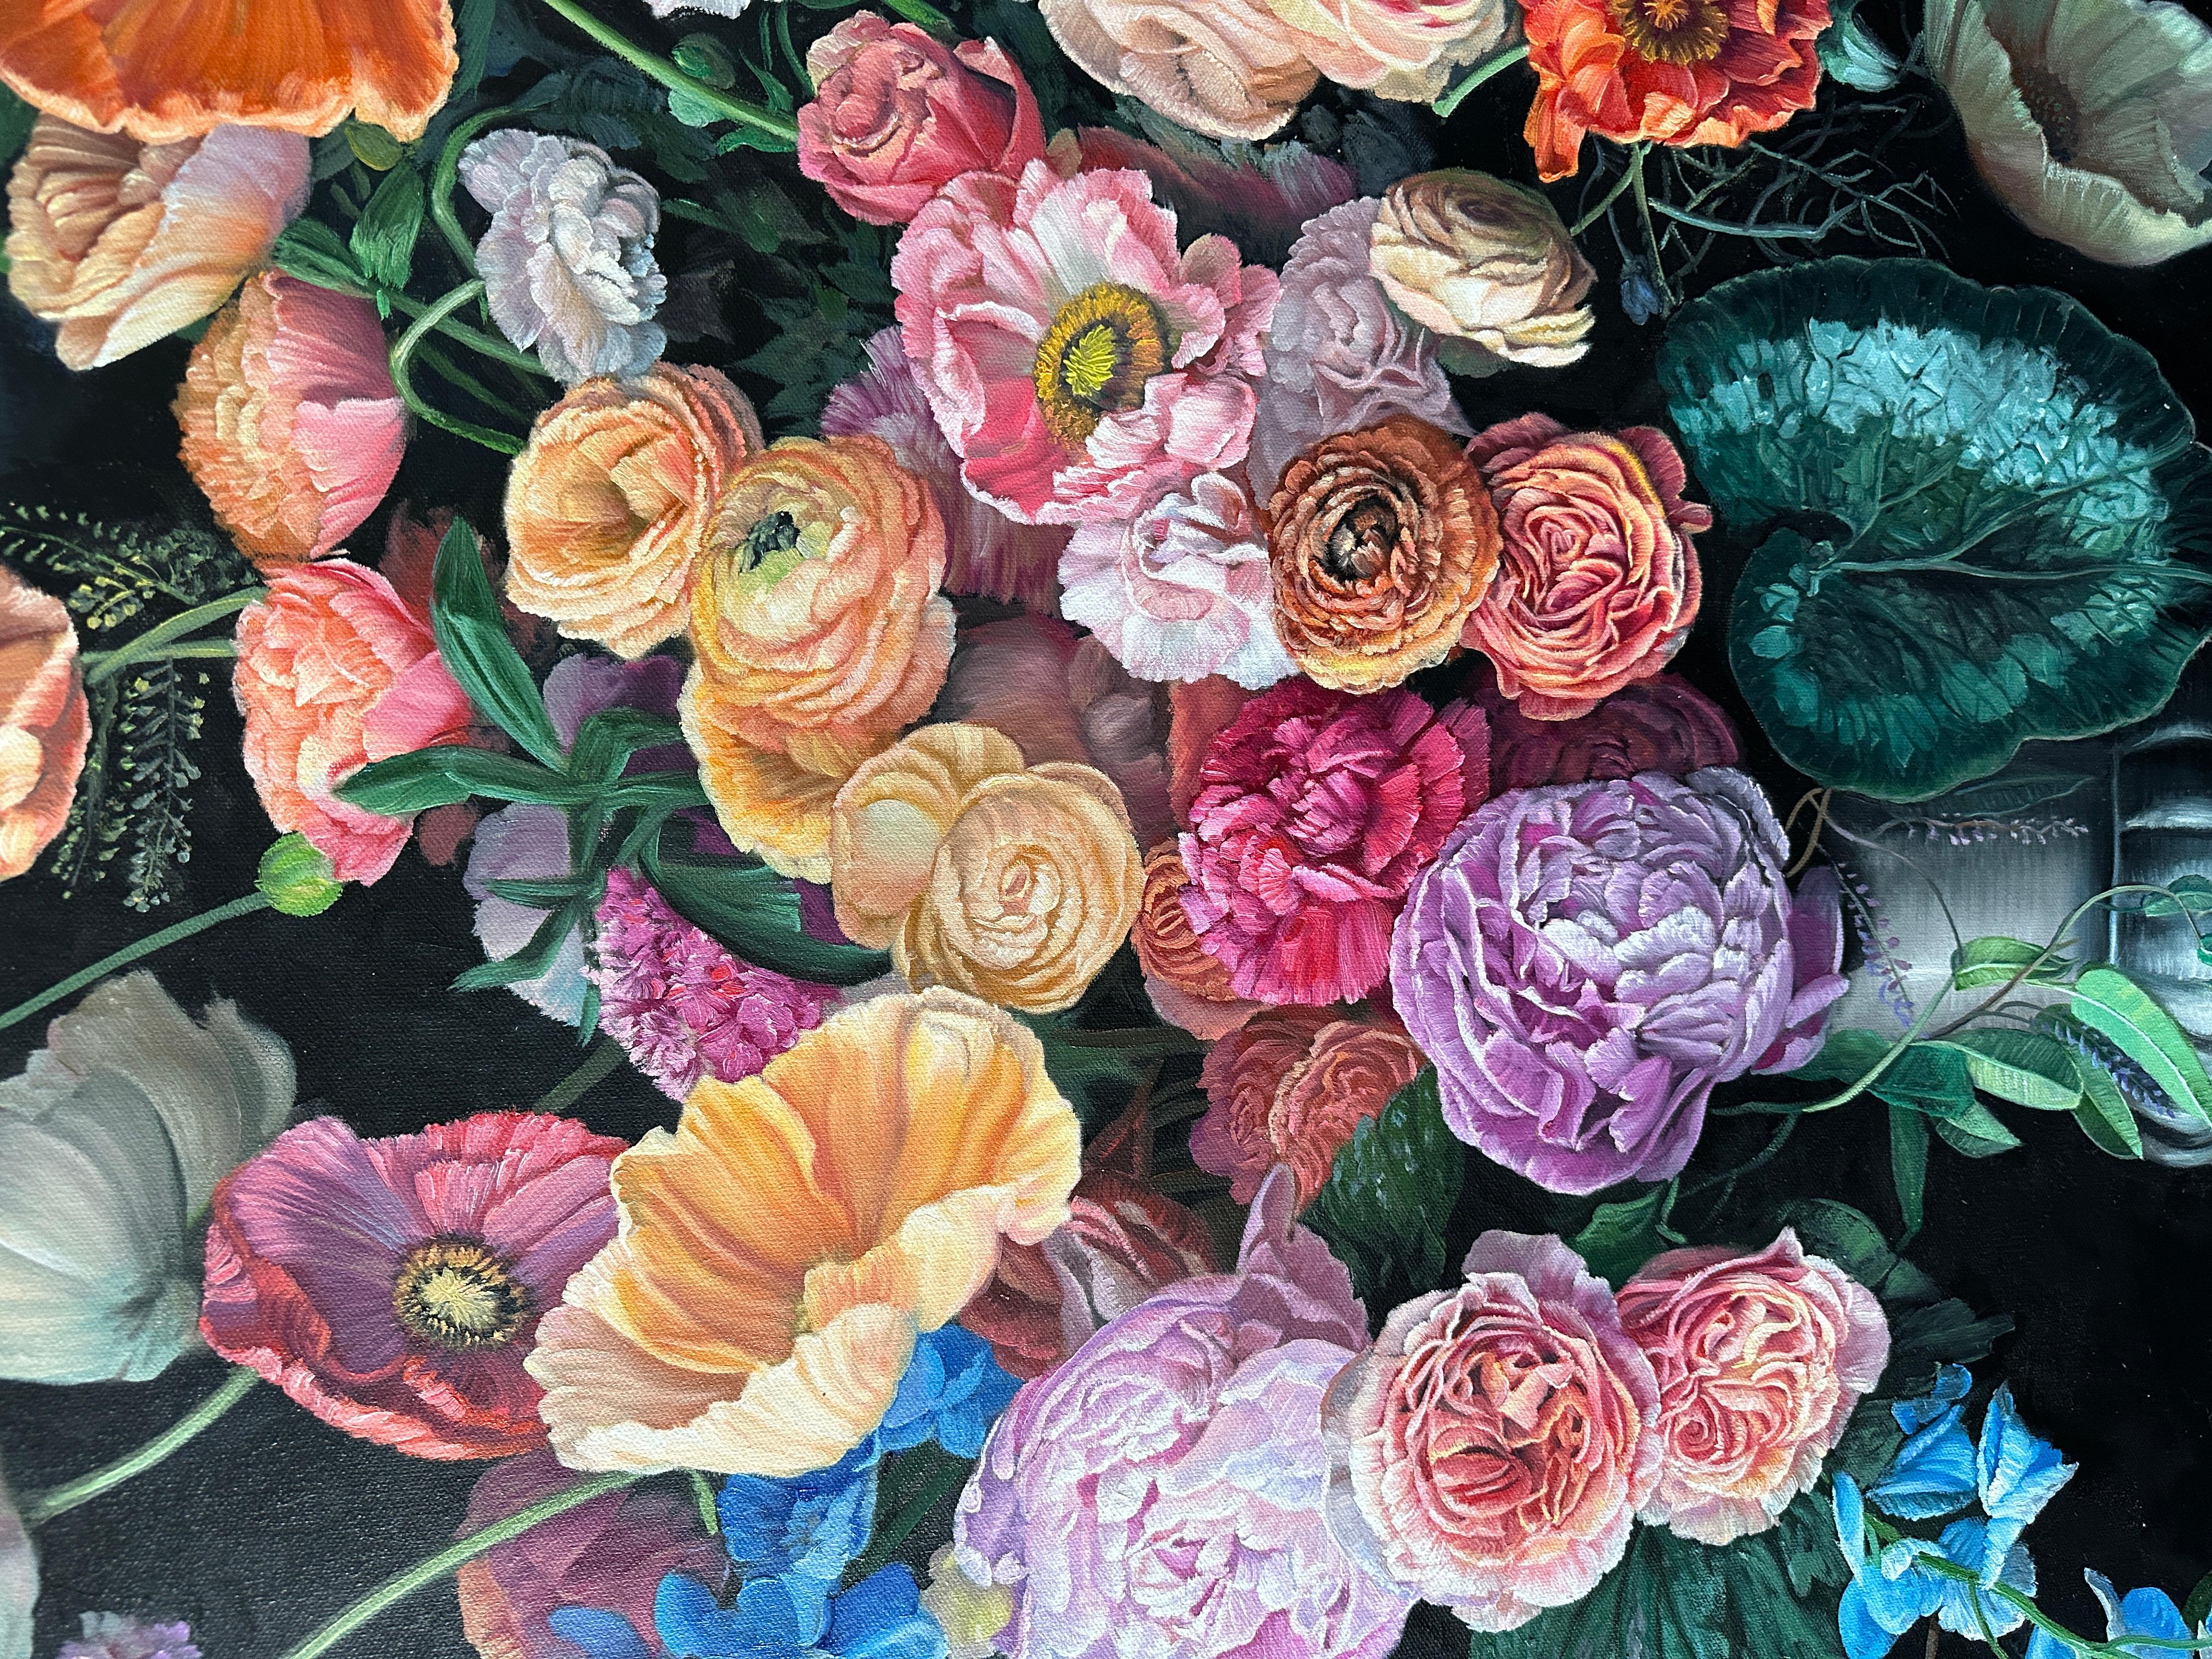 To see a World in a Grain of Sand
And a Heaven in a Wild Flower,
Hold Infinity in the palm of your hand 
And Eternity in an hour.
This is a beautiful large botanical oil painting of an array of flowers in a vase.
Contemporary painting full of